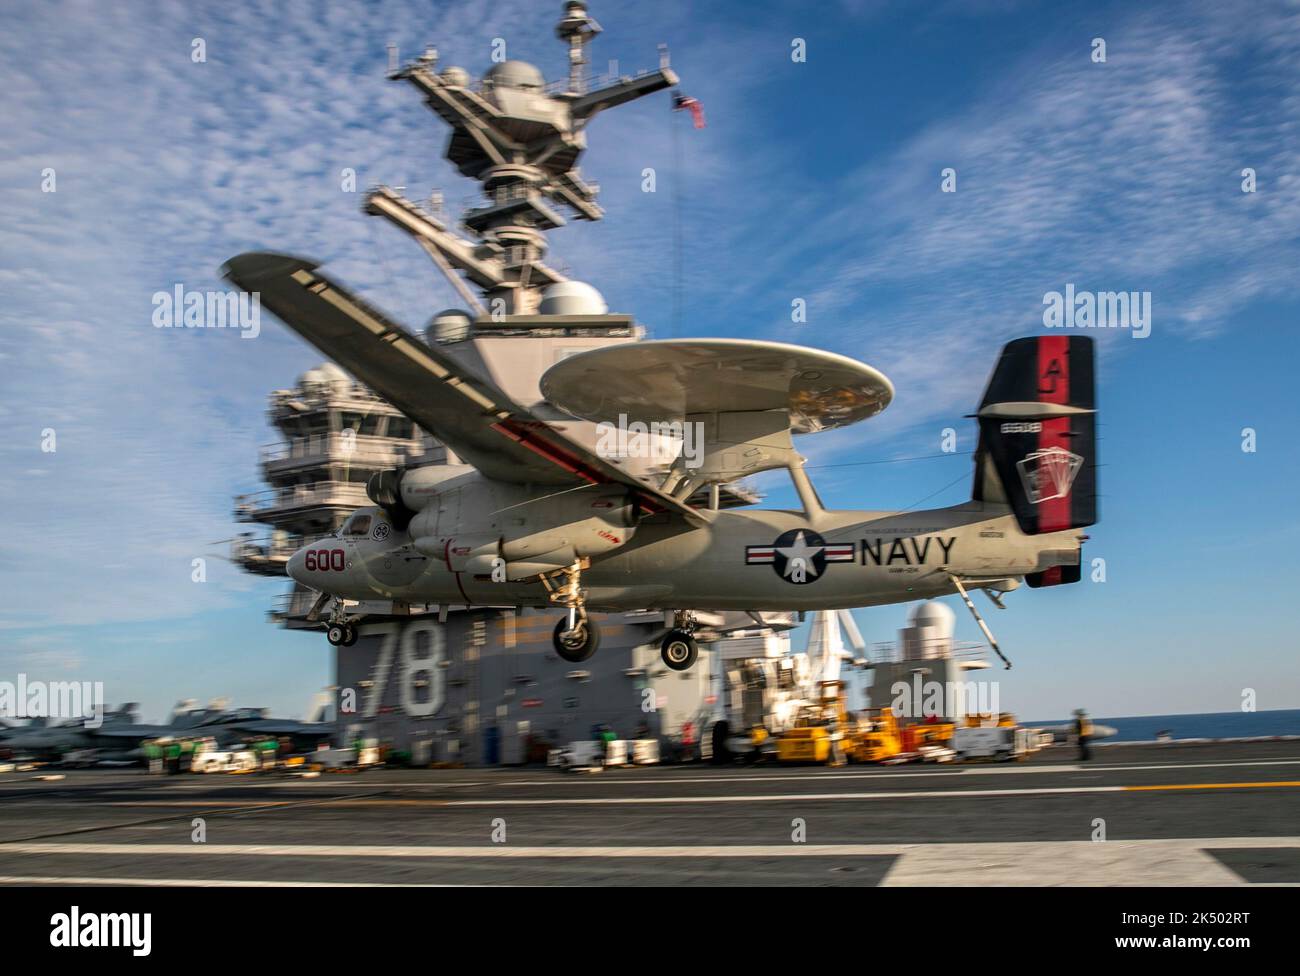 ATLANTIC OCEAN (Nov. 14, 2020) An E-2C Hawkeye attached to the 'Bear Aces' of Airborne Command and Control Squadron (VAW) 124 prepares to land aboard the aircraft carrier USS Gerald R. Ford (CVN 78), Nov. 14, 2020. Gerald R. Ford is underway in the Atlantic Ocean conducting first-ever integrated carrier strike group operations with Carrier Air Wing 8, Destroyer Squadron 2 and their air and missile defense commander, commanding officer of the aircraft carrier USS Gettysburg (CG 64). (U.S. Navy photo by Mass Communication Specialist 2nd Class Kallysta Castillo) Stock Photo